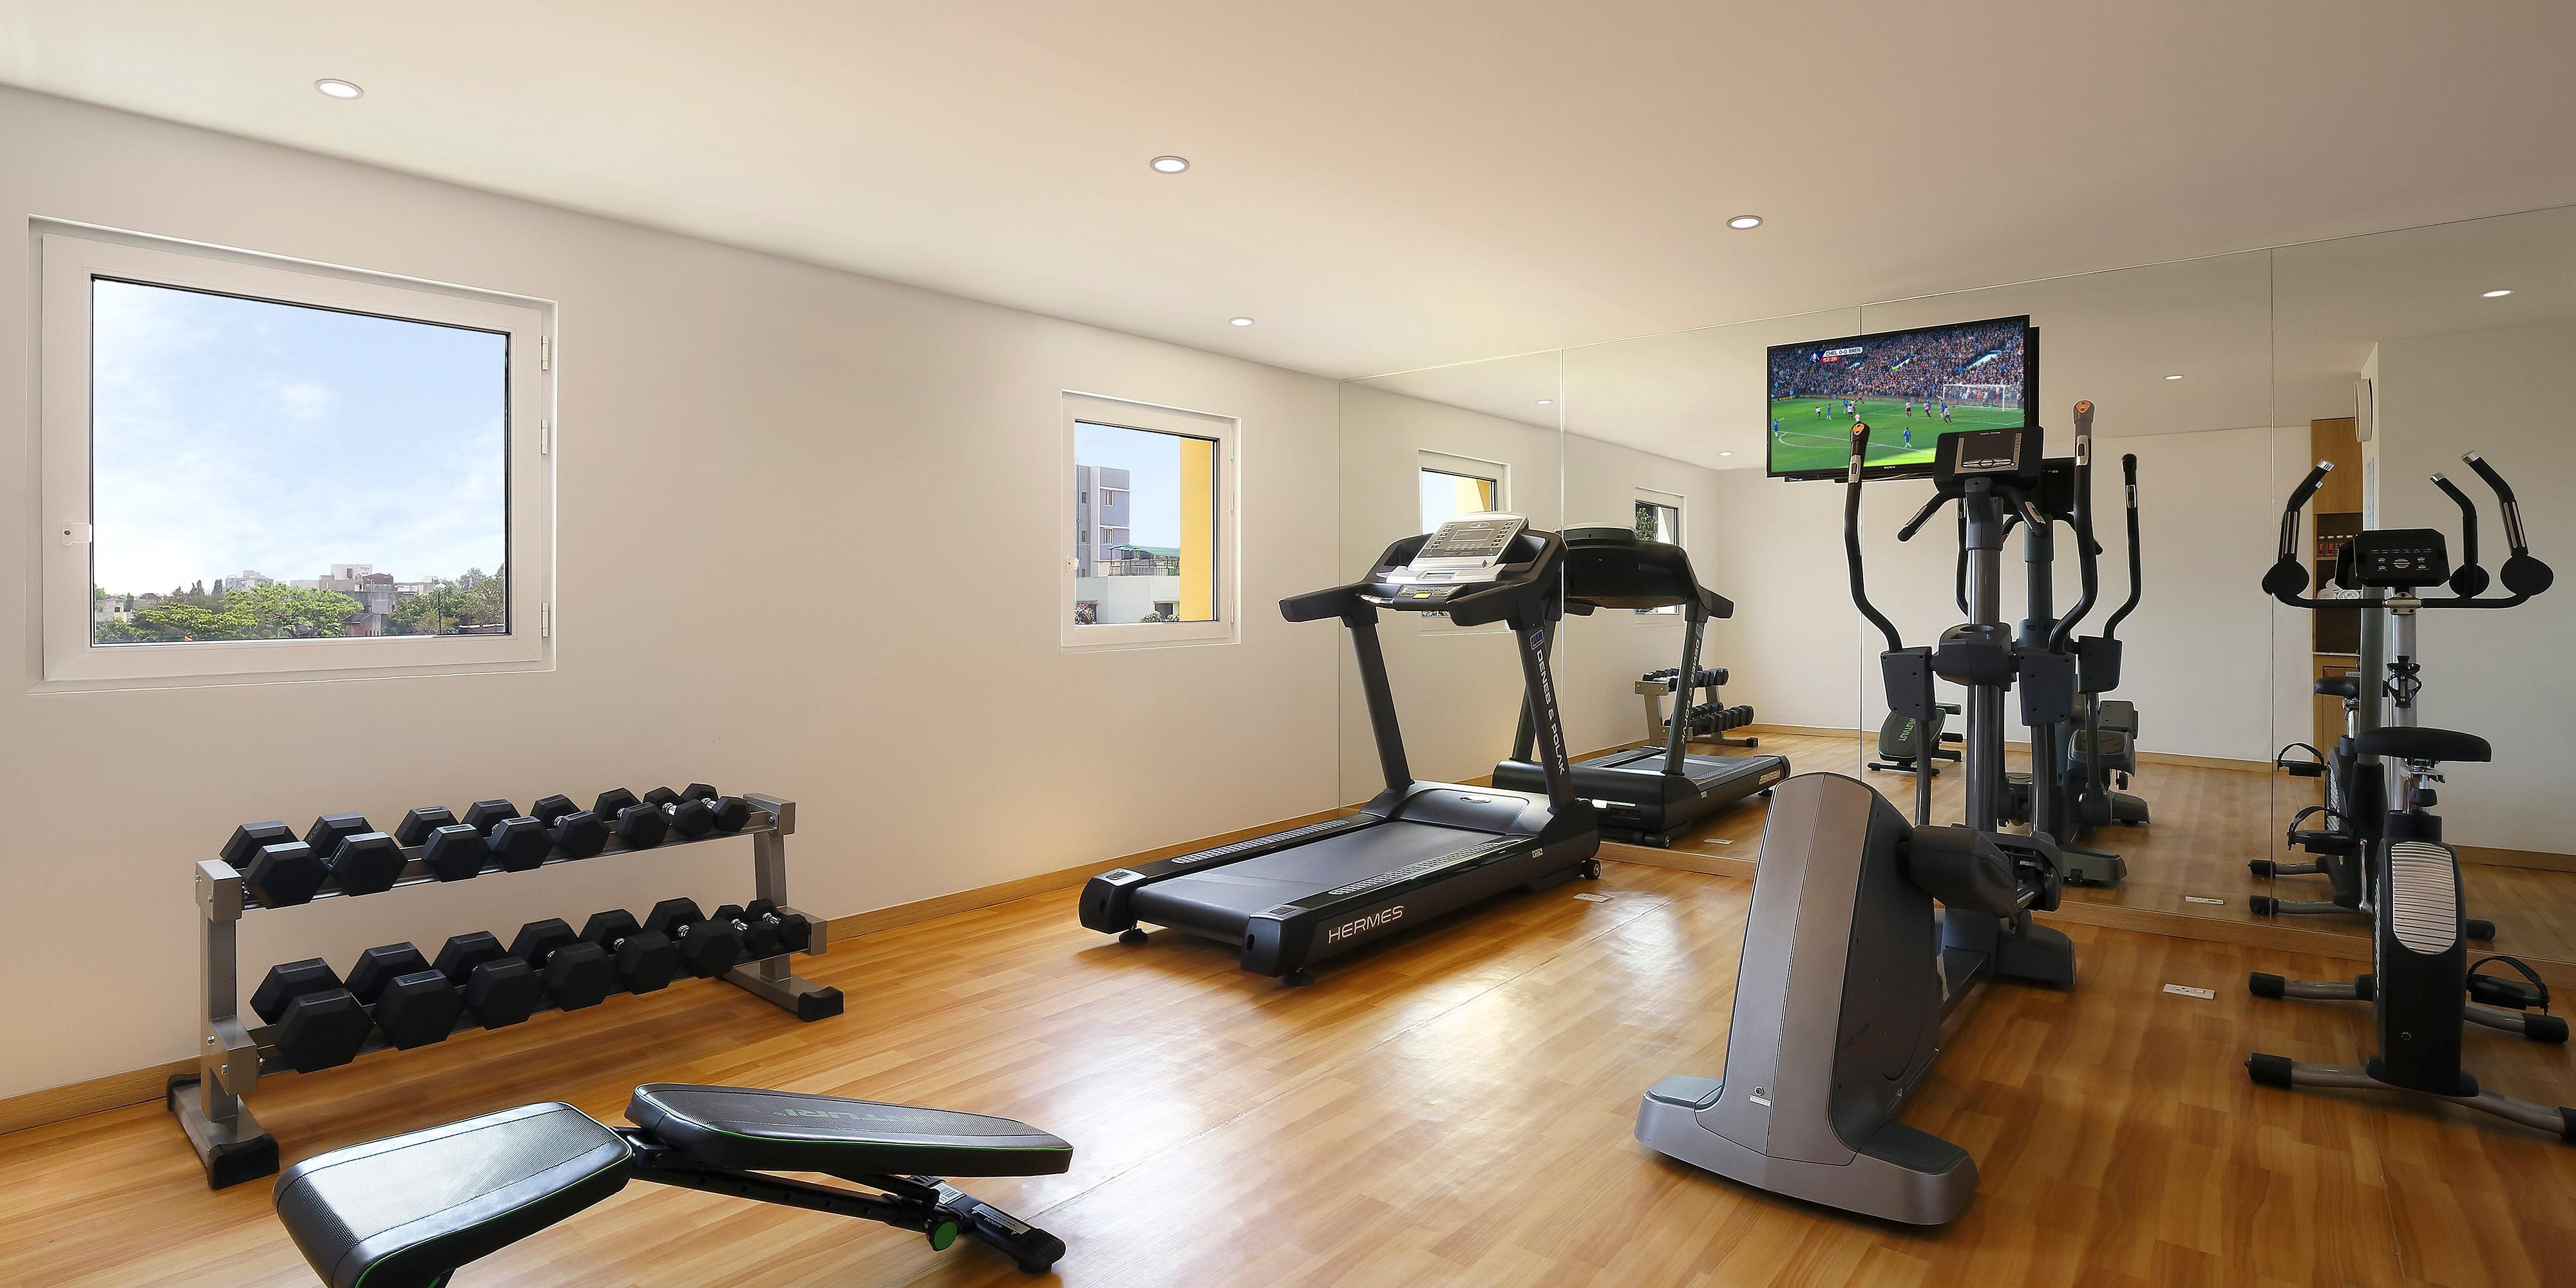 A heaven for fitness enthusiasts, the Fitness Center at the Holiday Inn Express Nashik features state-of-the-art training and workout equipment including treadmills, individual strength workout stations, cross trainers and a free weights section, equipped with exercise balls and Yoga mats 